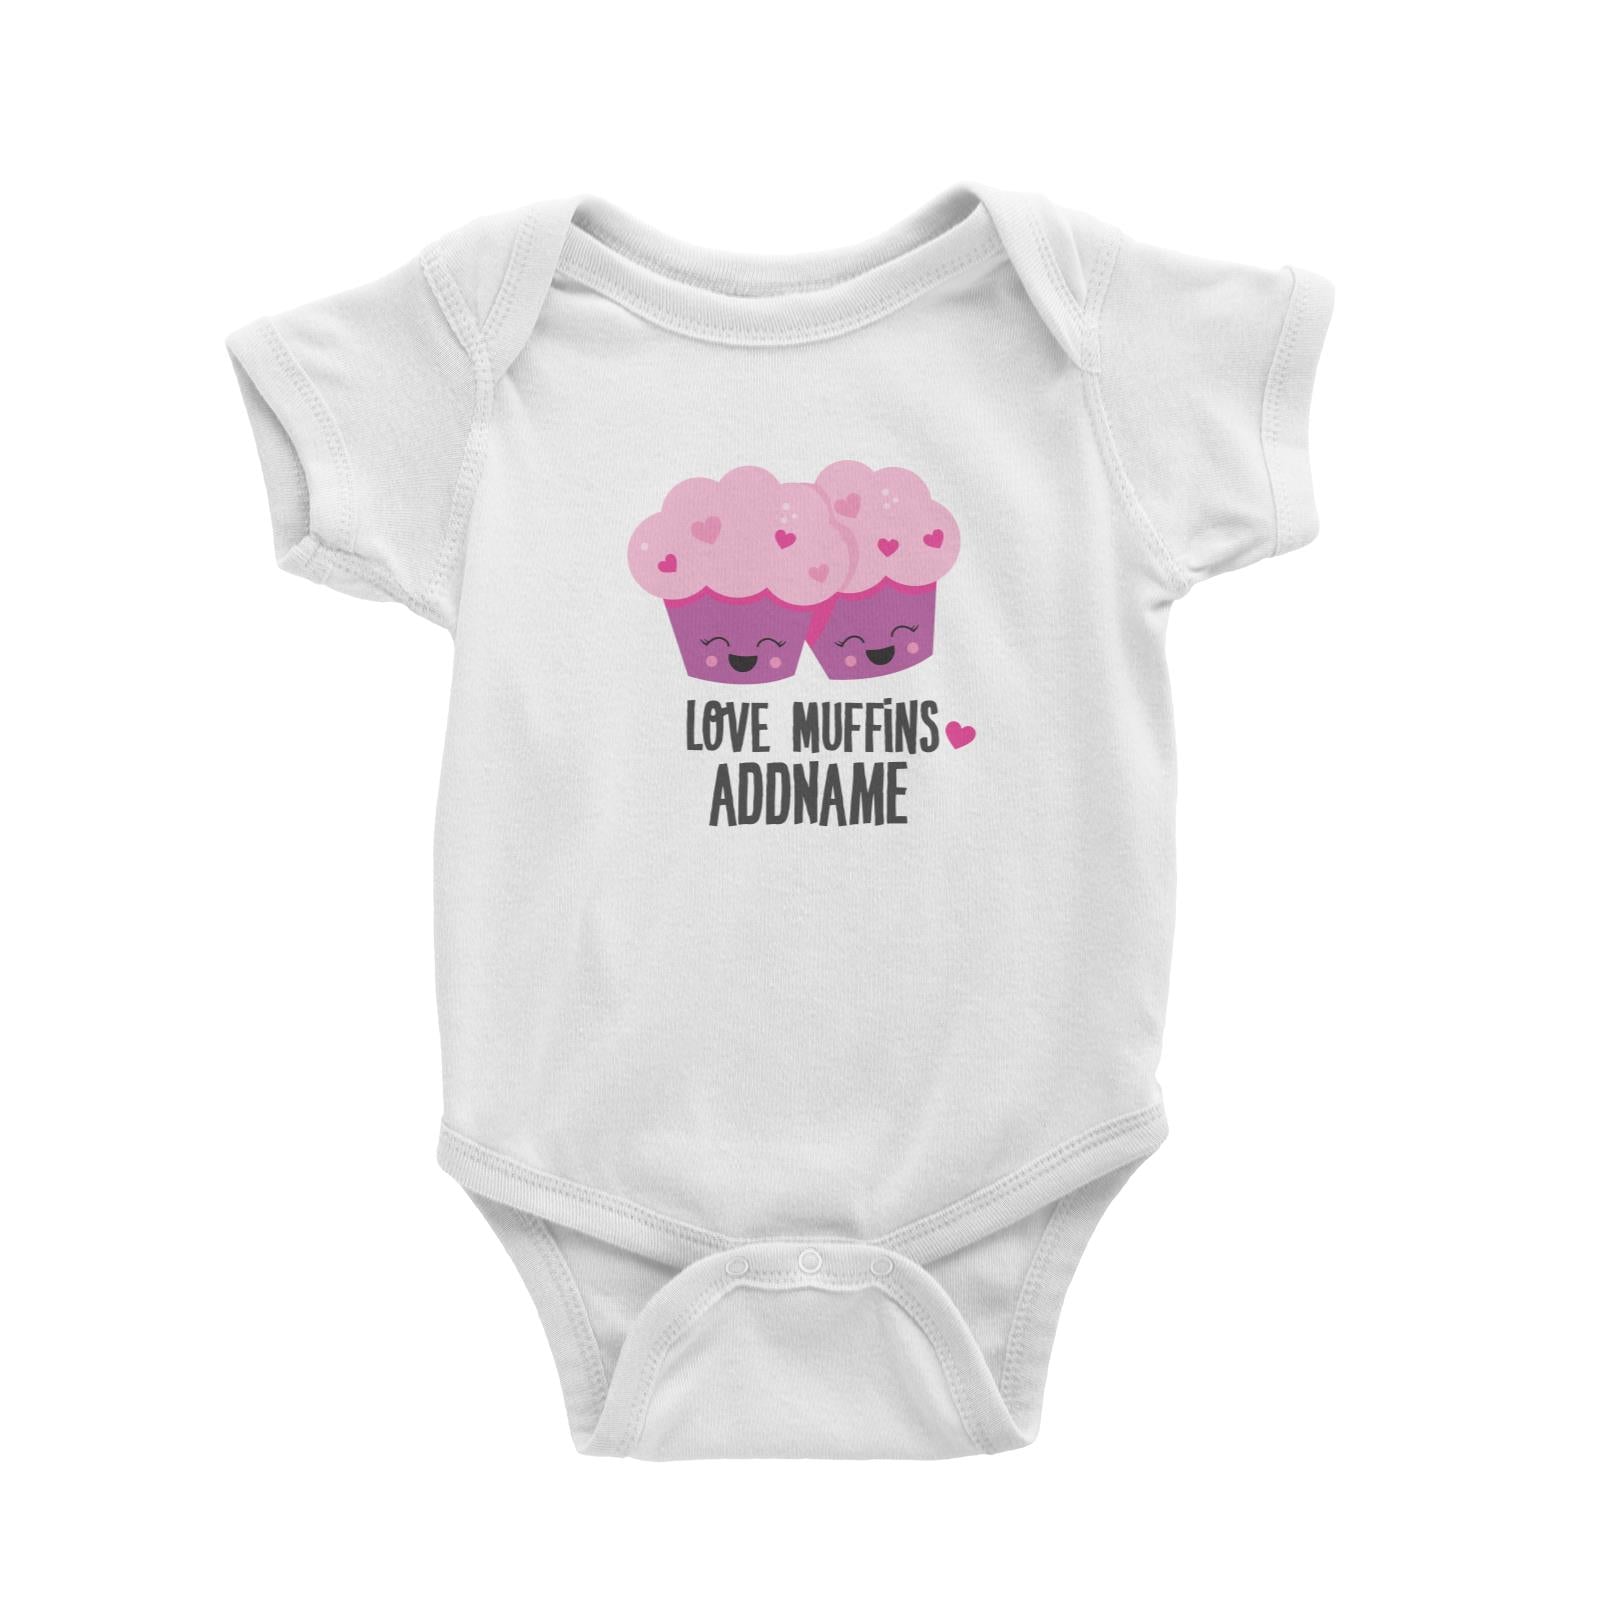 Love Food Puns Love Muffins Addname White Baby Romper